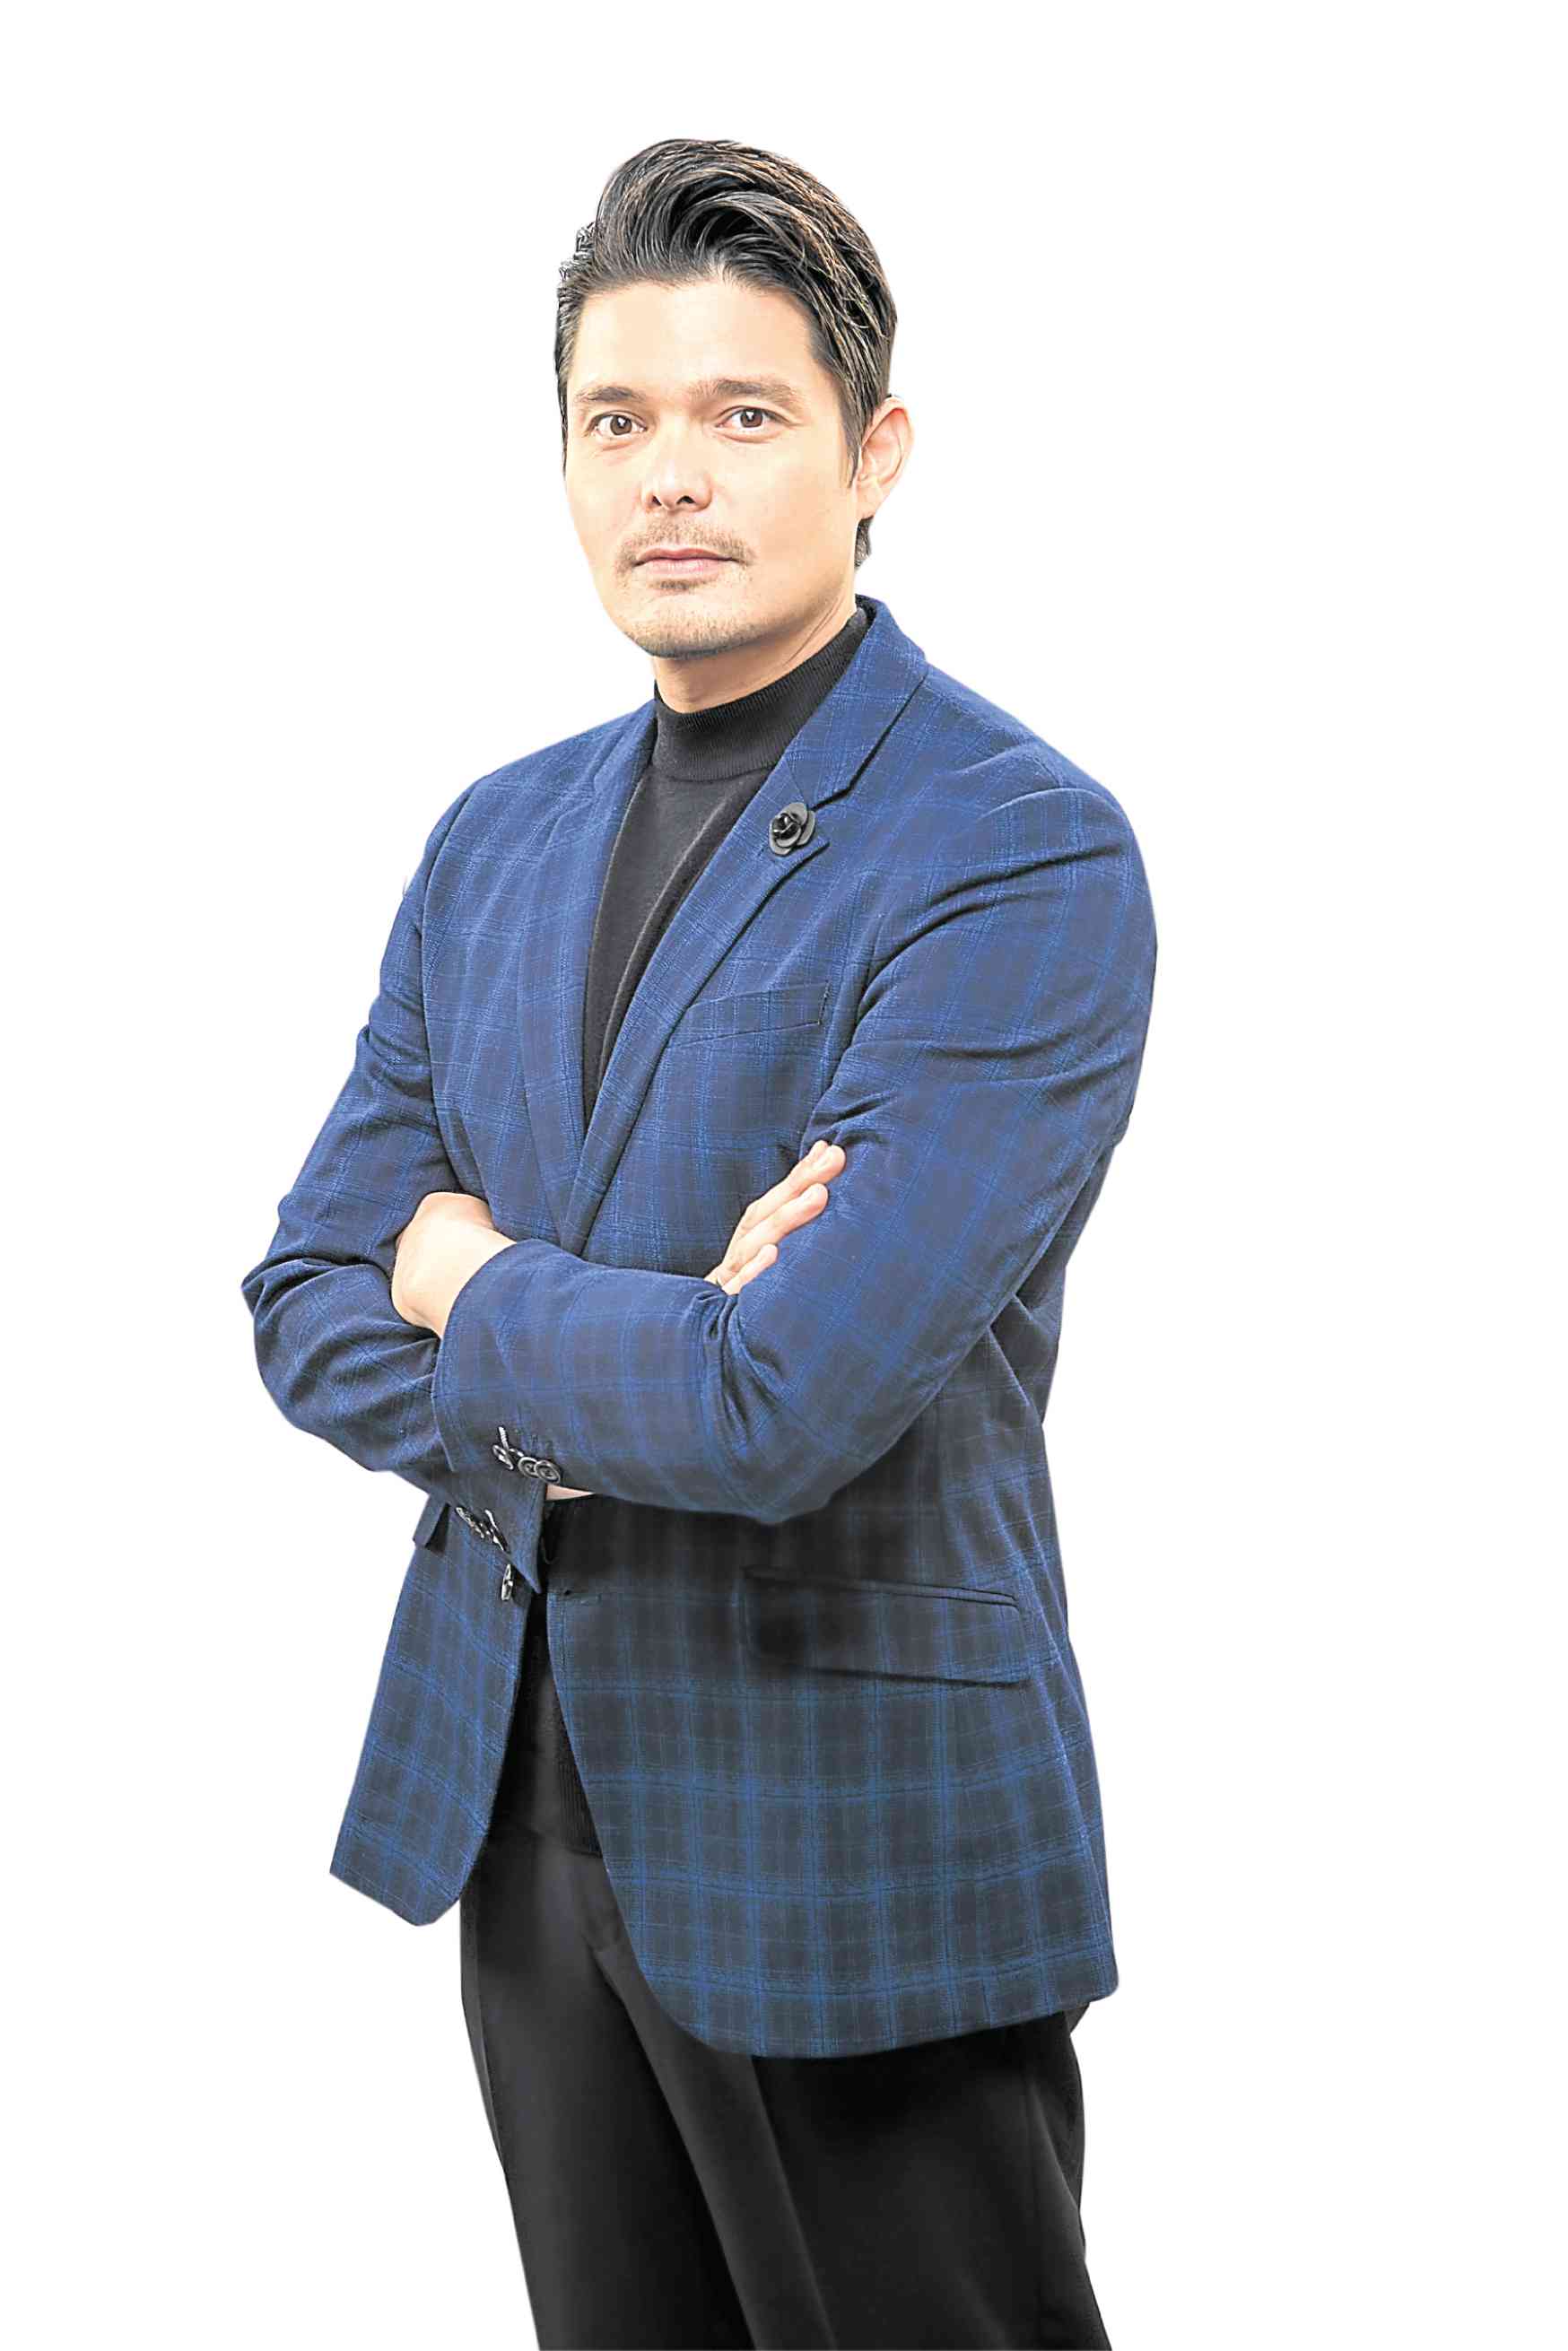 Dingdong Dantes to compete in 42-km race | Inquirer ...